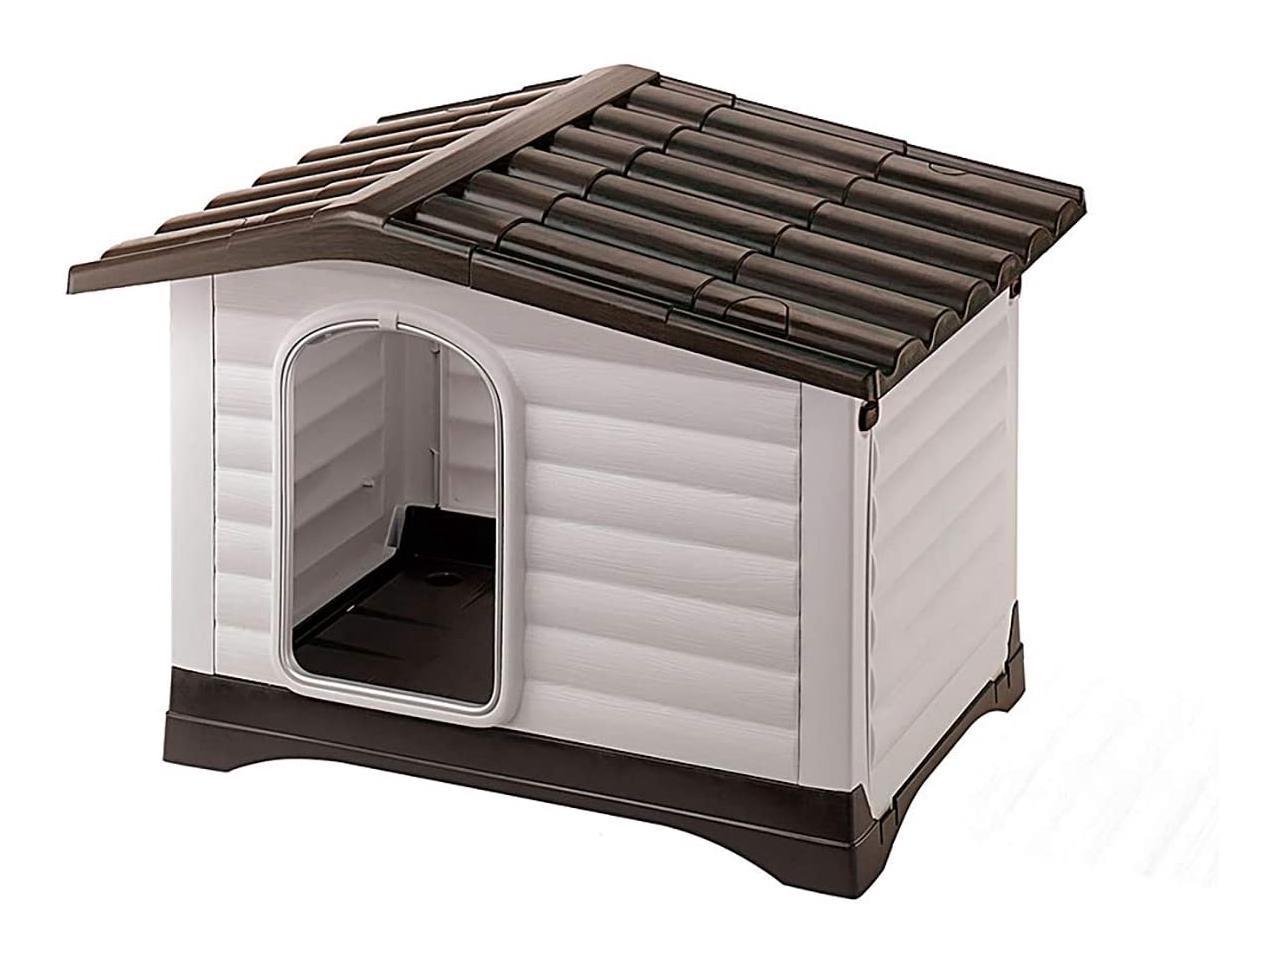 Erommy Waterproof Ventilate Pet Kennel with Air Vents and Elevated Floor for Indoor Outdoor